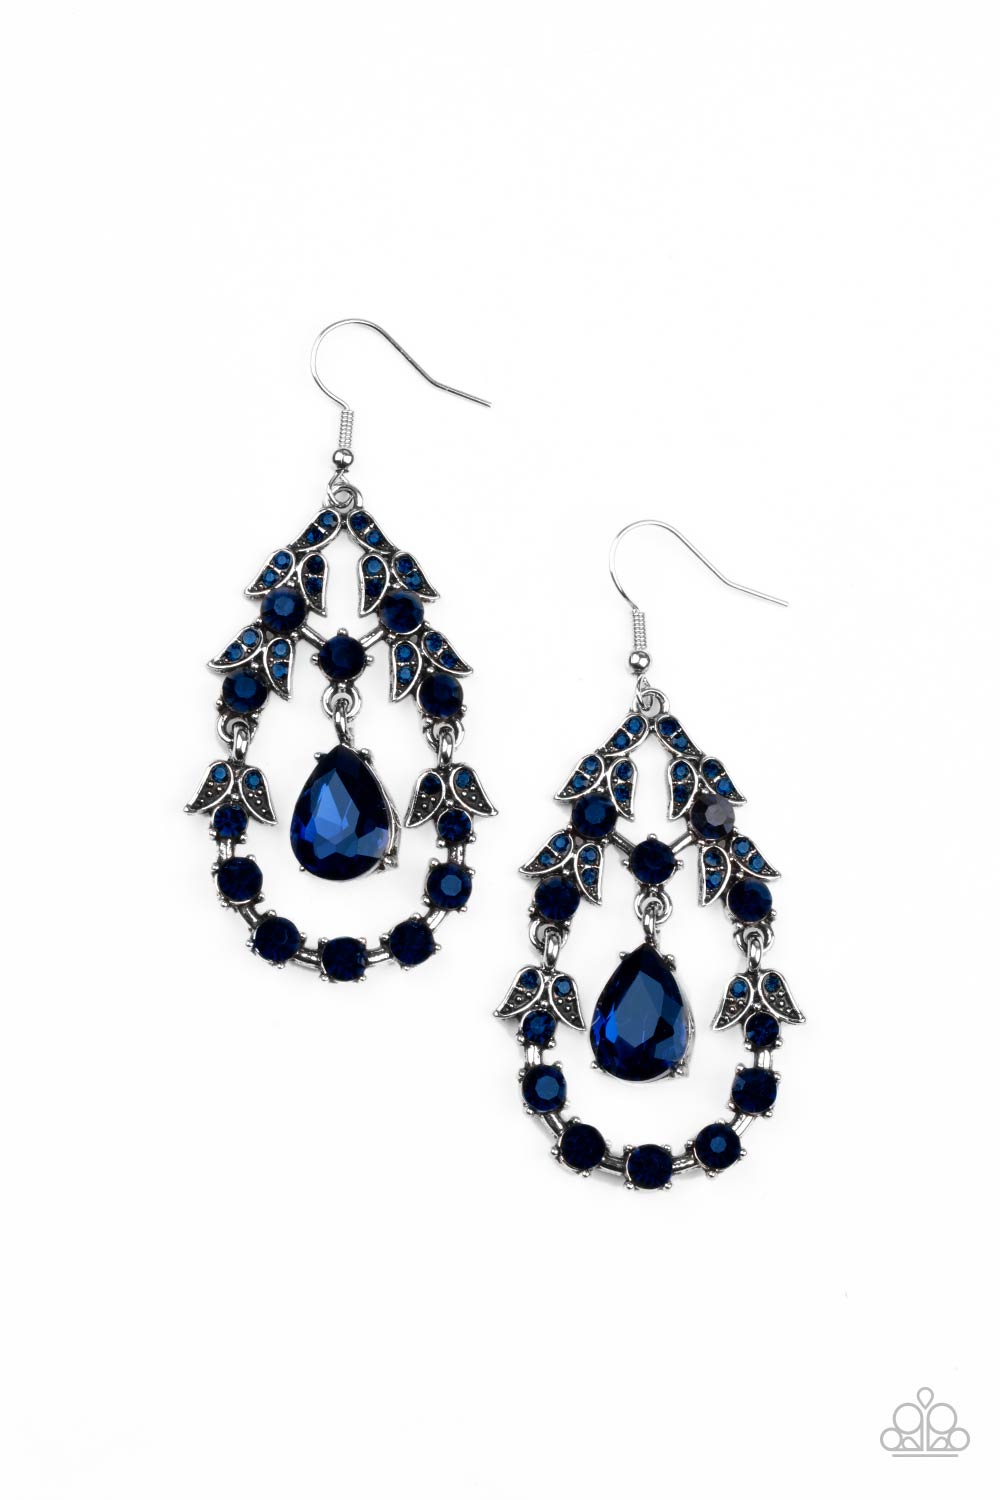 Garden Decorum Blue Earring - Paparazzi Accessories  A solitaire blue teardrop rhinestone swings from the top of an ornately hinged teardrop frame adorned in blue rhinestone dotted leafy silver frames, creating a glamorous centerpiece. Earring attaches to a standard fishhook fitting.  ﻿All Paparazzi Accessories are lead free and nickel free!  Sold as one pair of earrings.